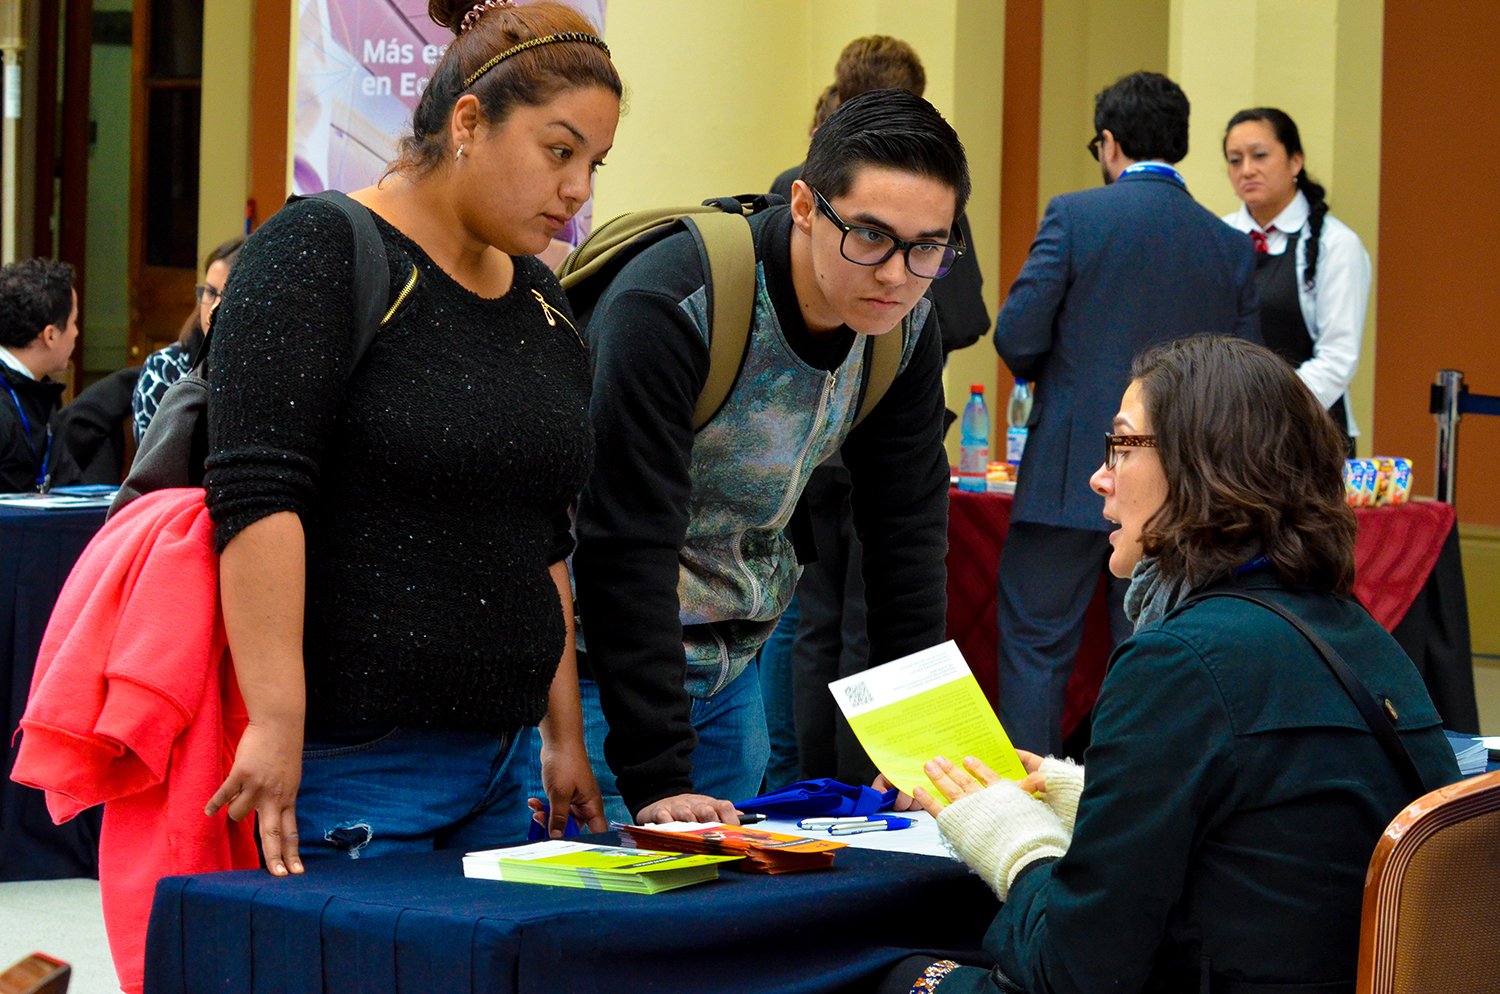 Students learn about higher education opportunities in the U.S.